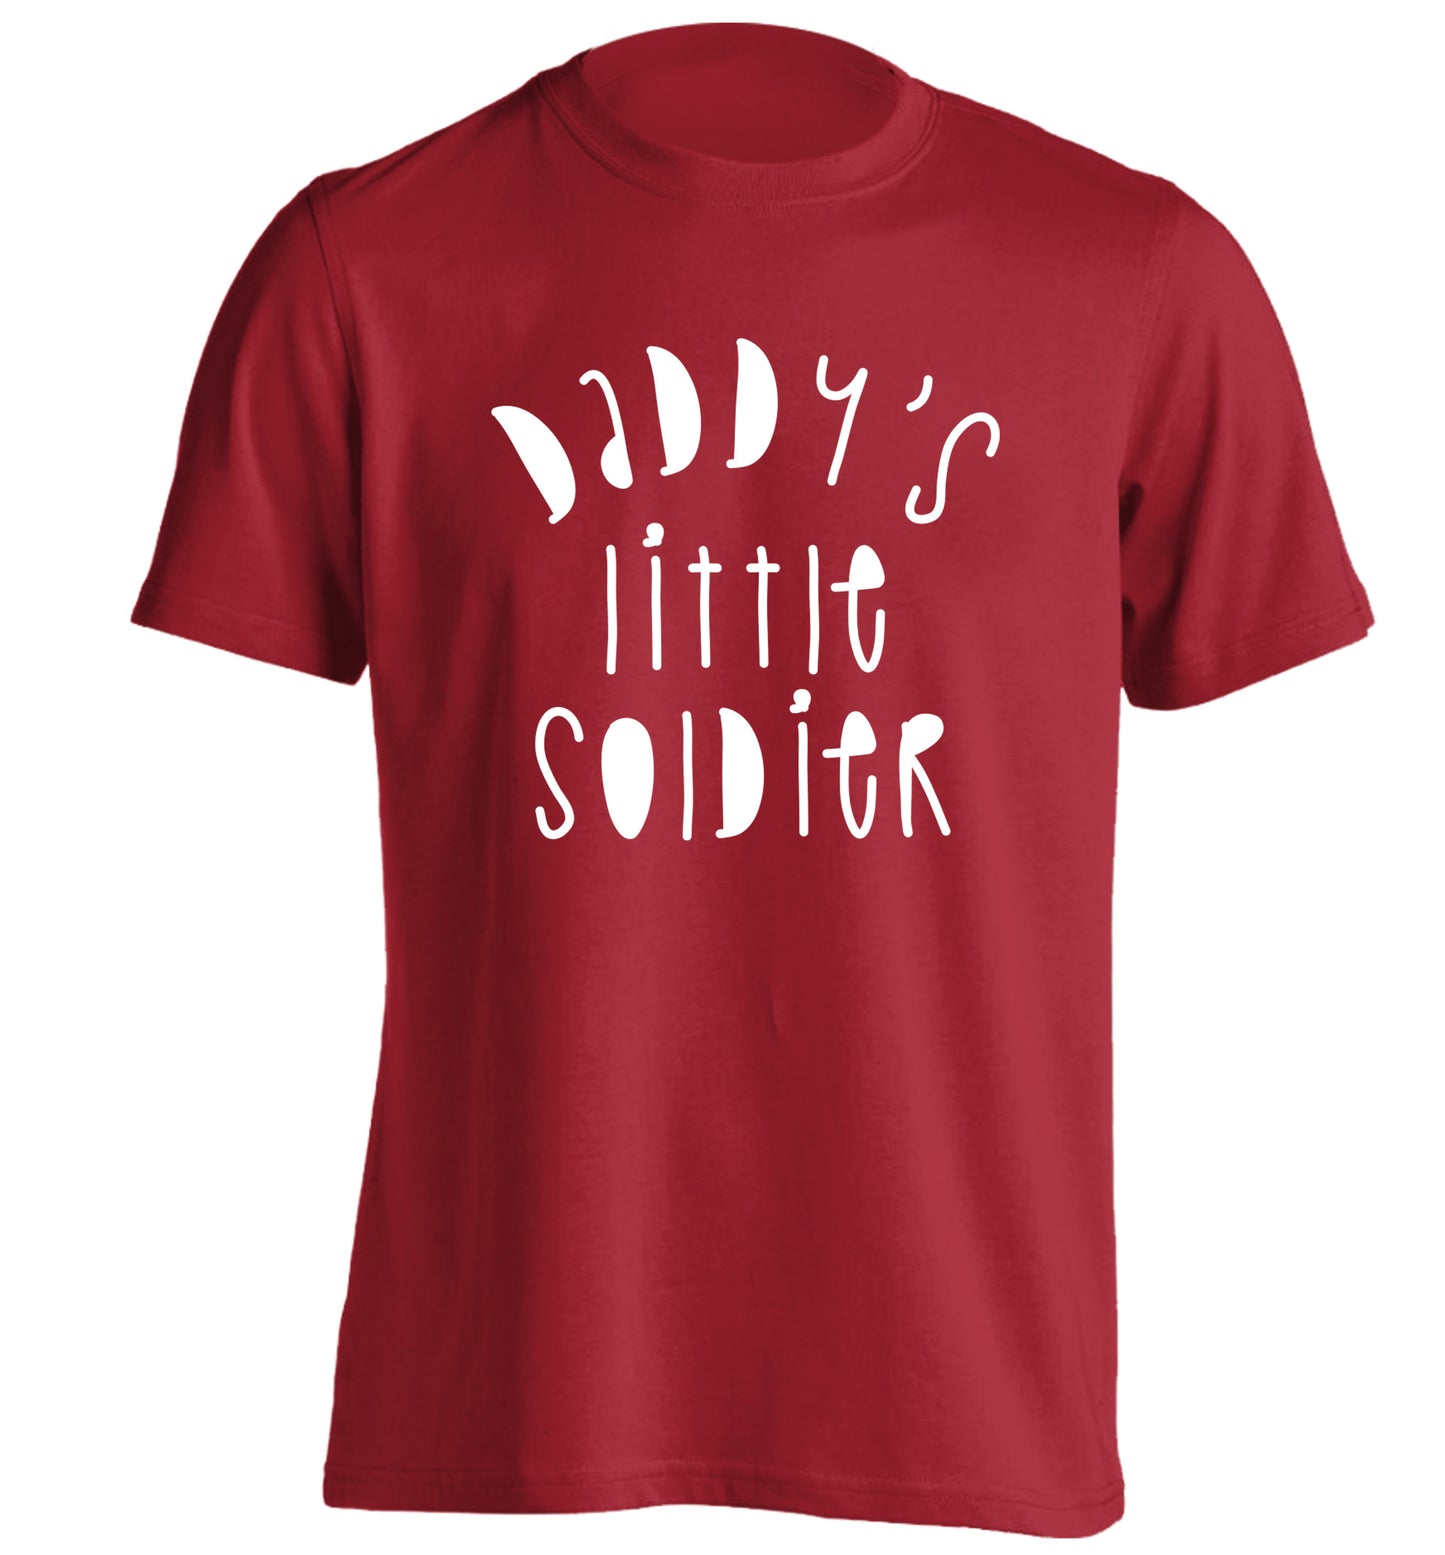 Daddy's little soldier adults unisex red Tshirt 2XL